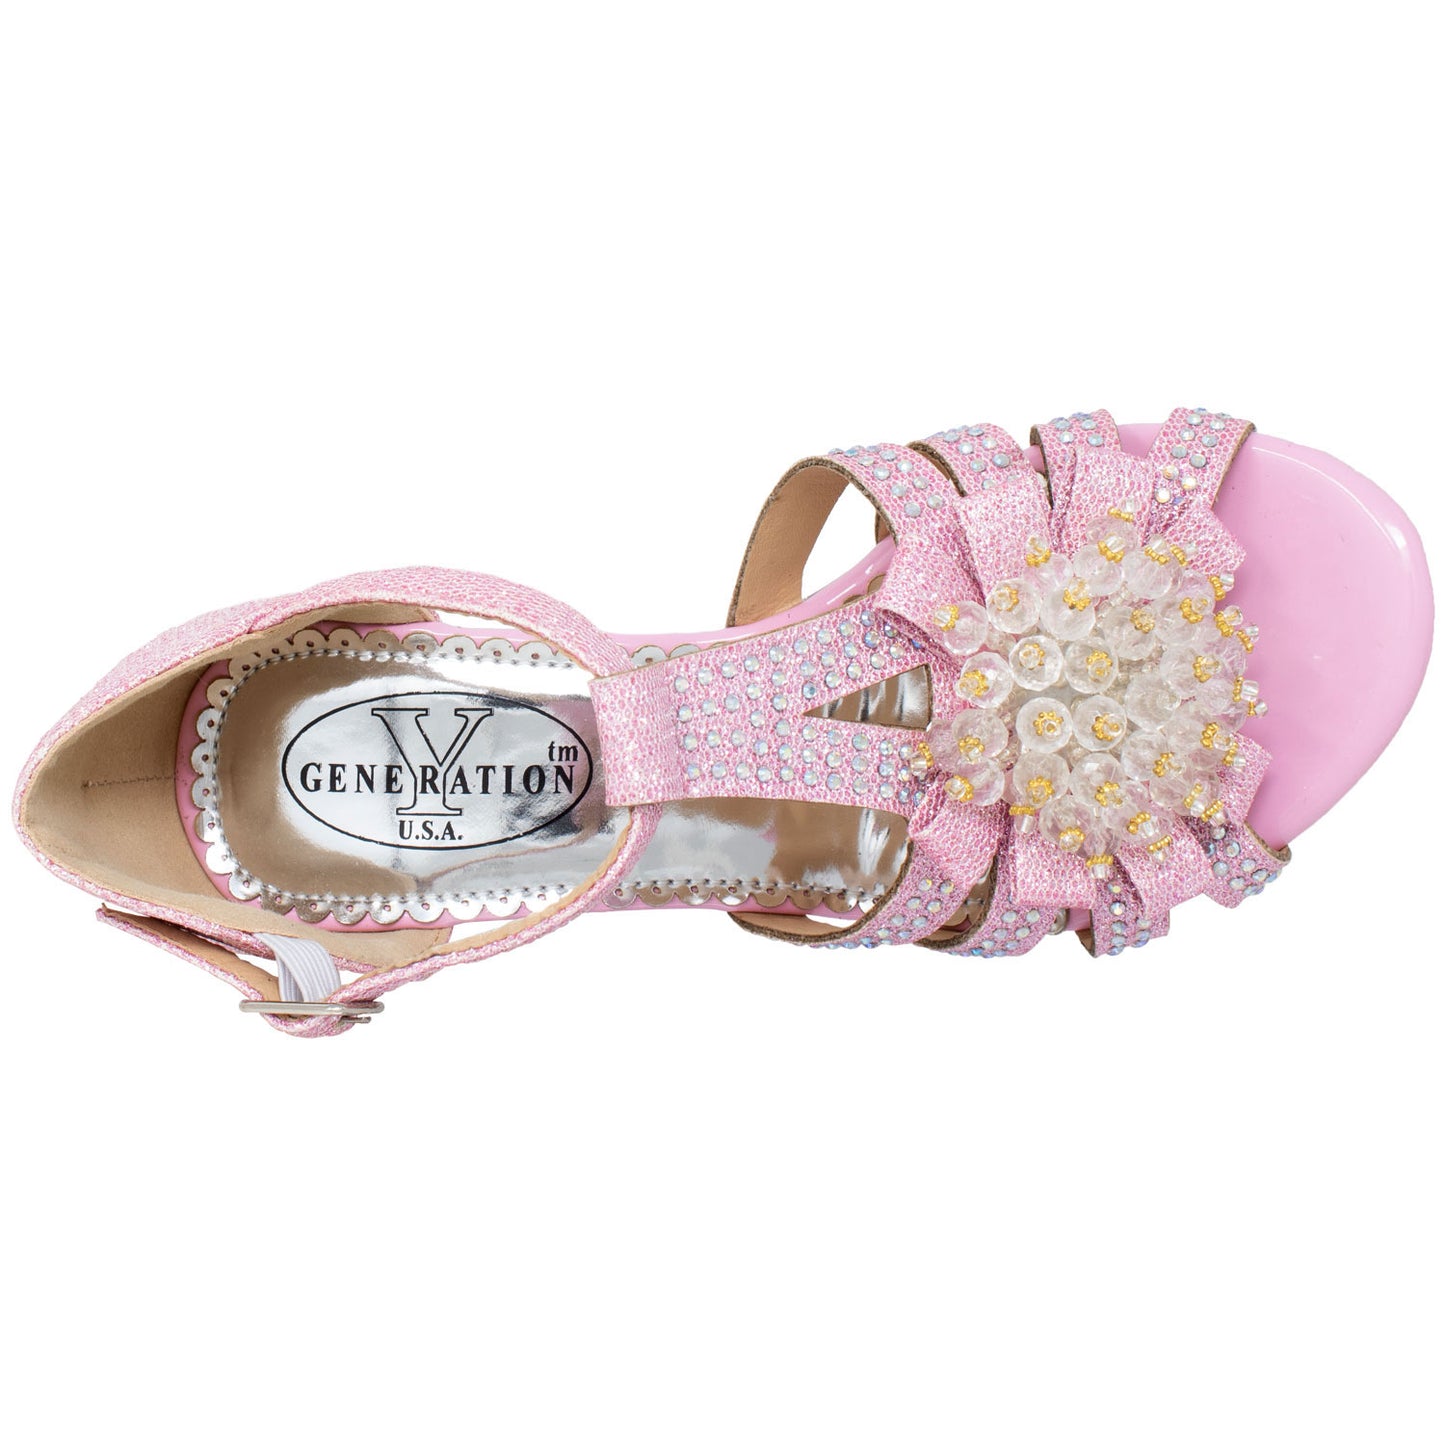 Generation Y Girl's T-Strap Beaded Glit Painted Wedge Sandal